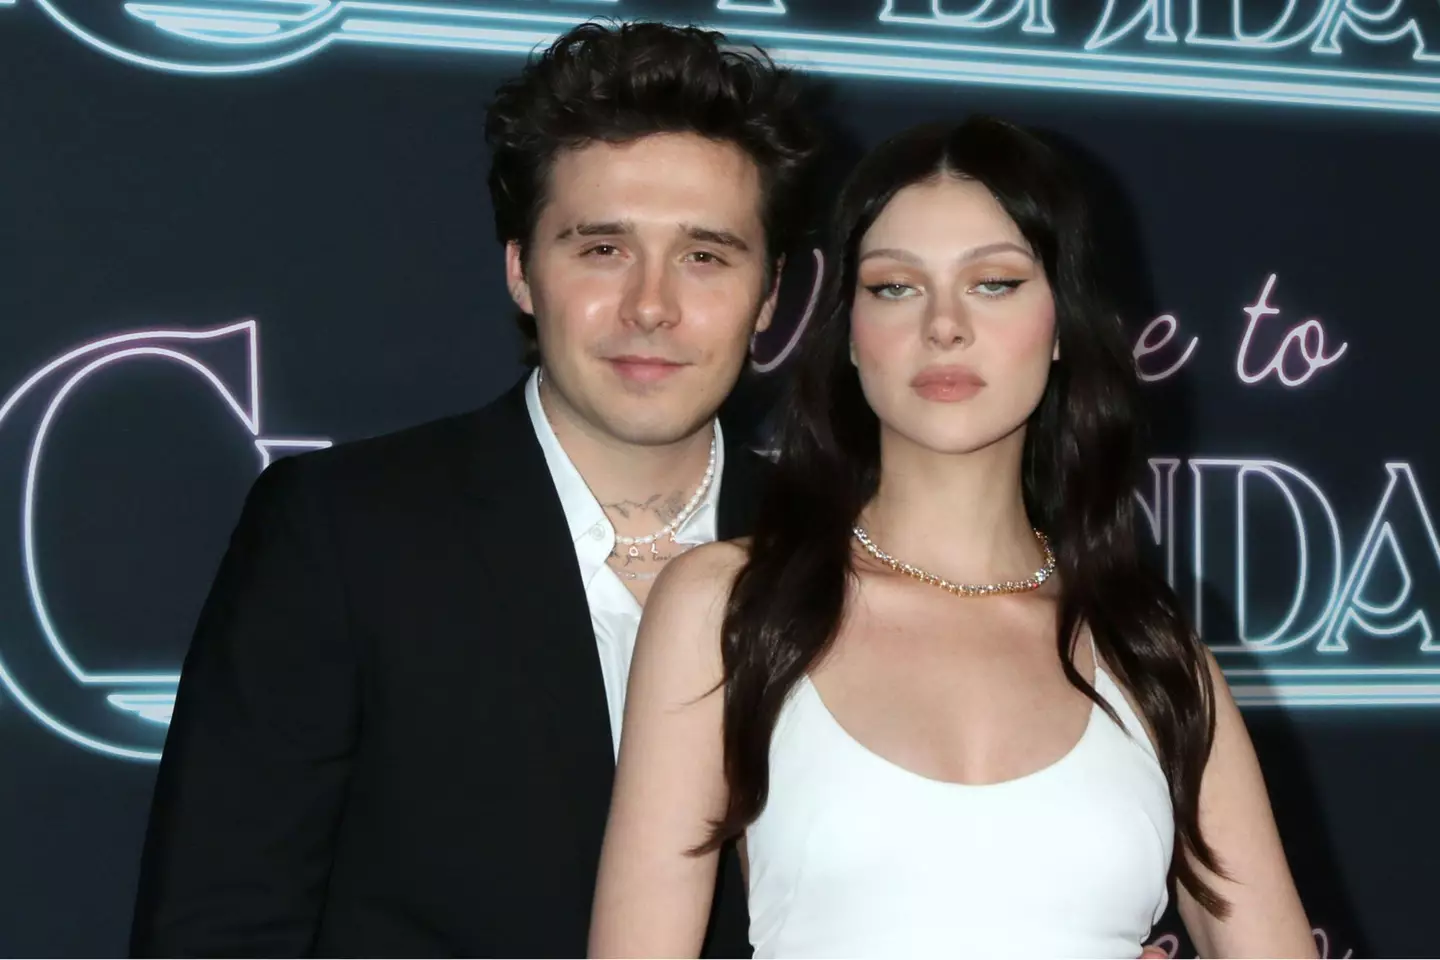 Brooklyn Beckham and Nicola Peltz tied the knot last year, but there is an ongoing legal battle over their wedding.